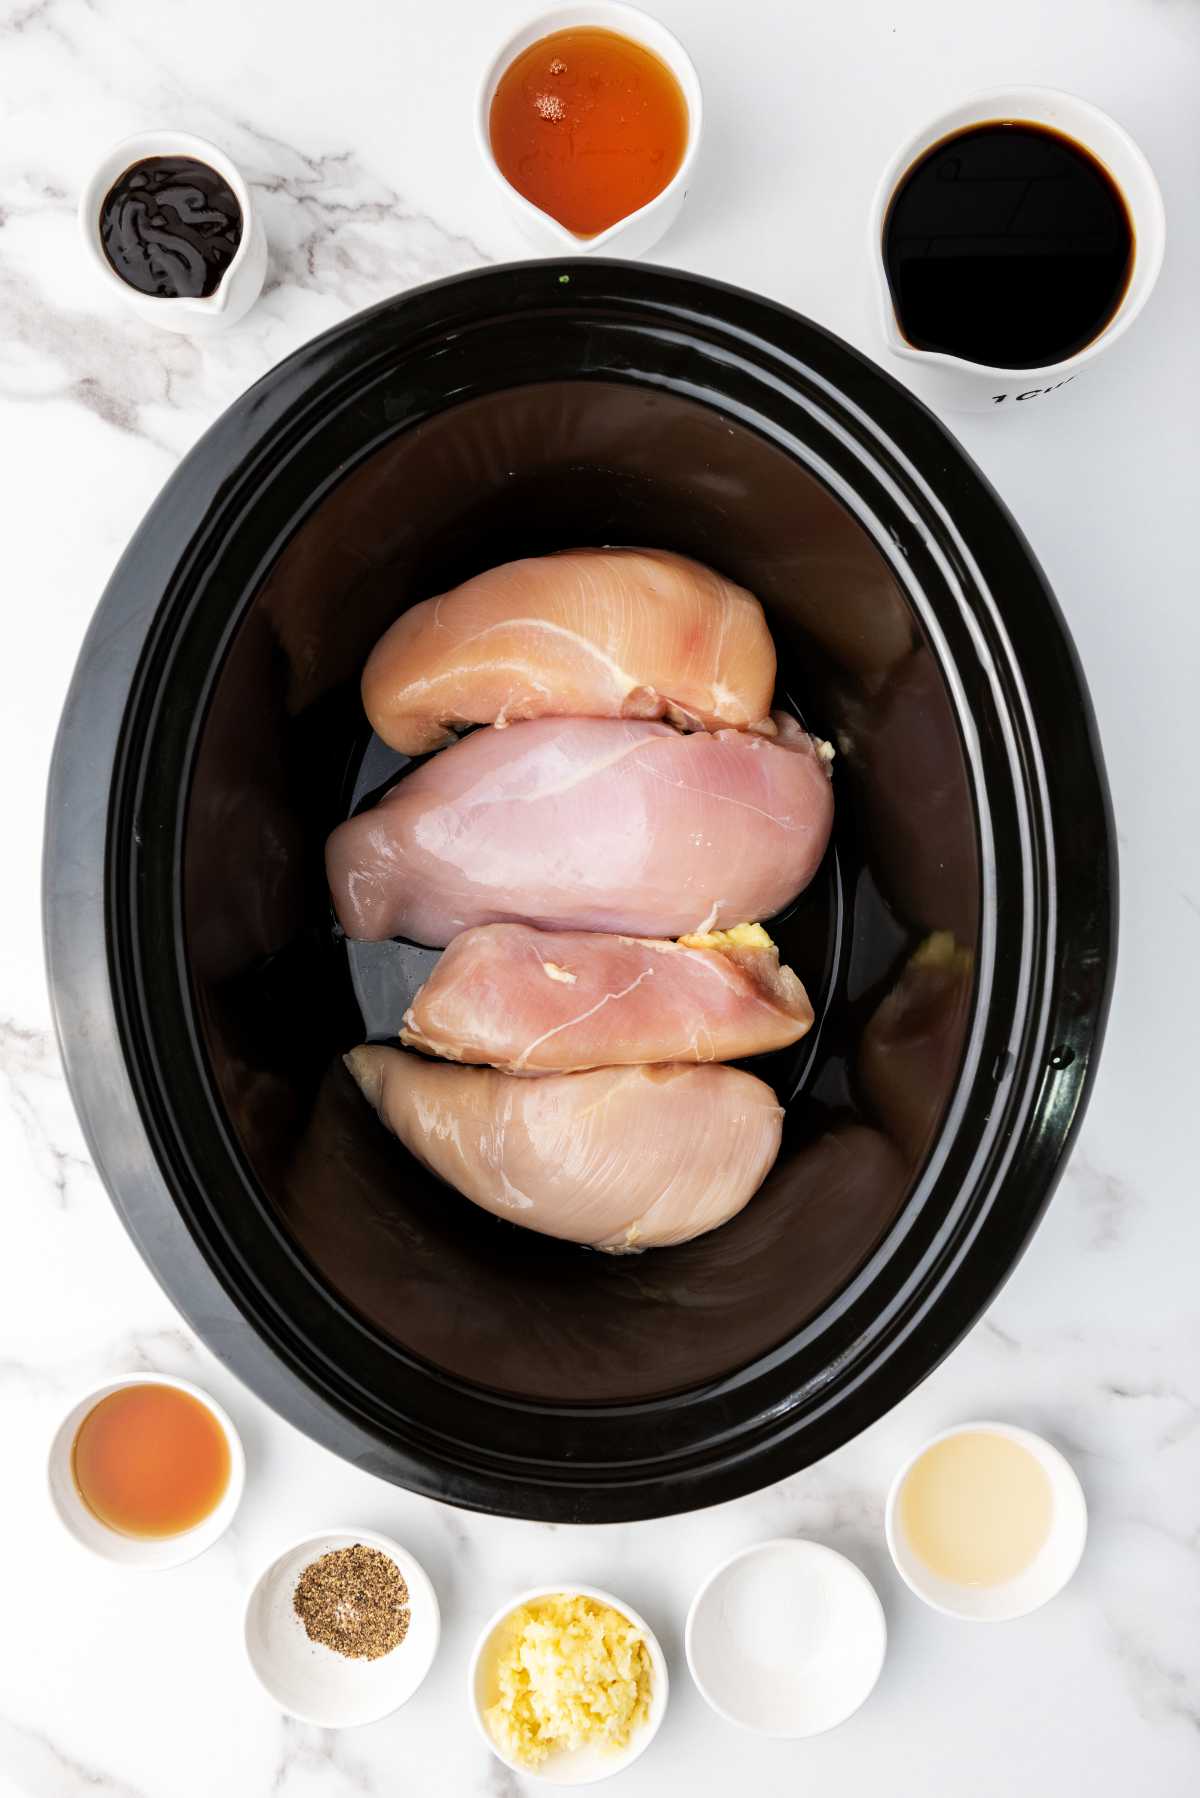 chicken in a slow cooker with bowls of ingredients nearby.